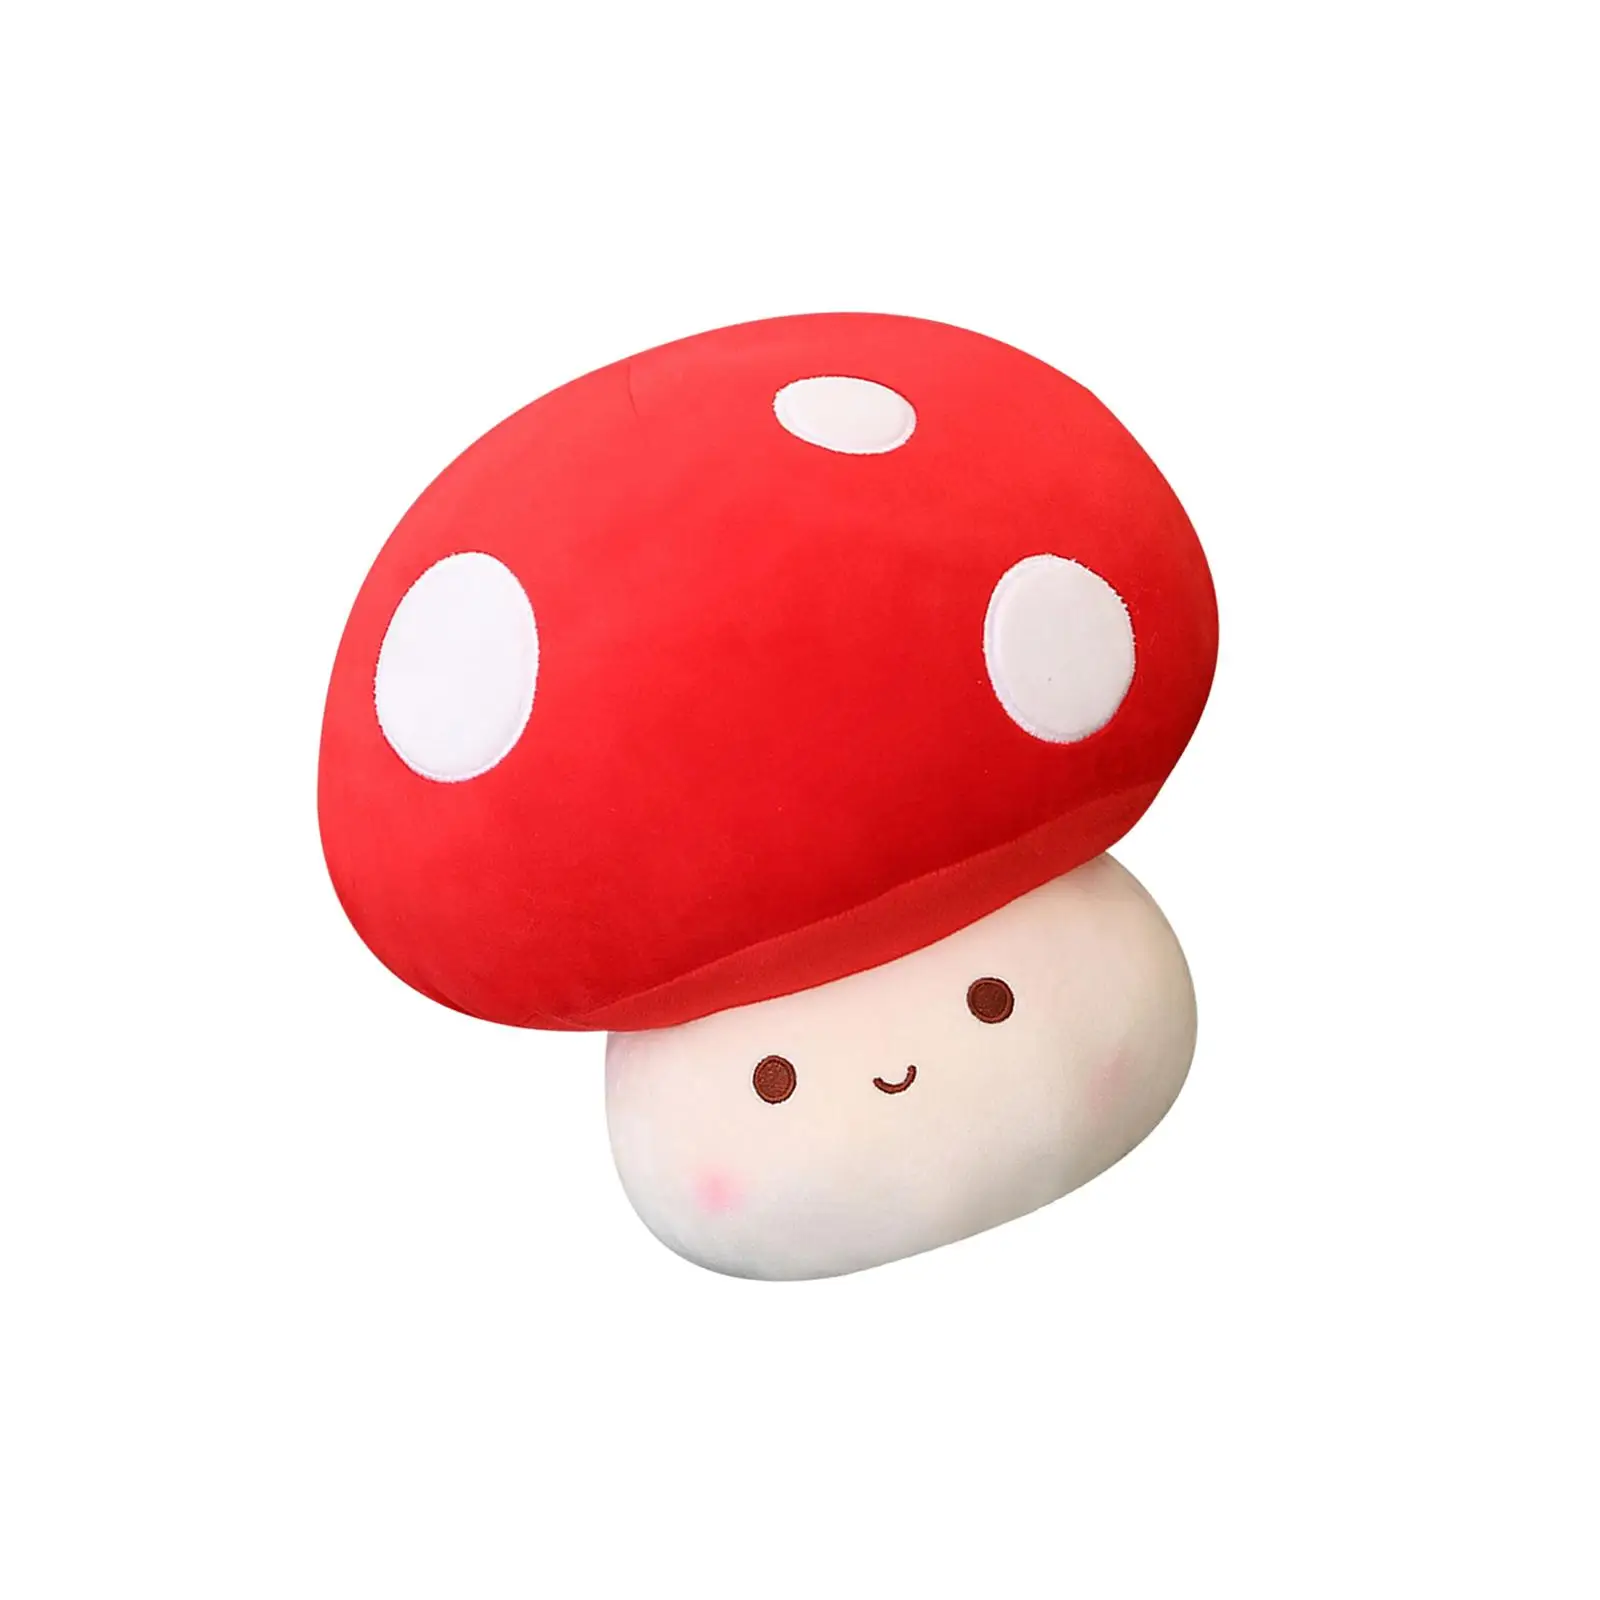 Adorable Mushroom Plush Toy Funny Collection Doll Toys Present Sofa pillow for Party Favors Bedroom New Year Birthday Children